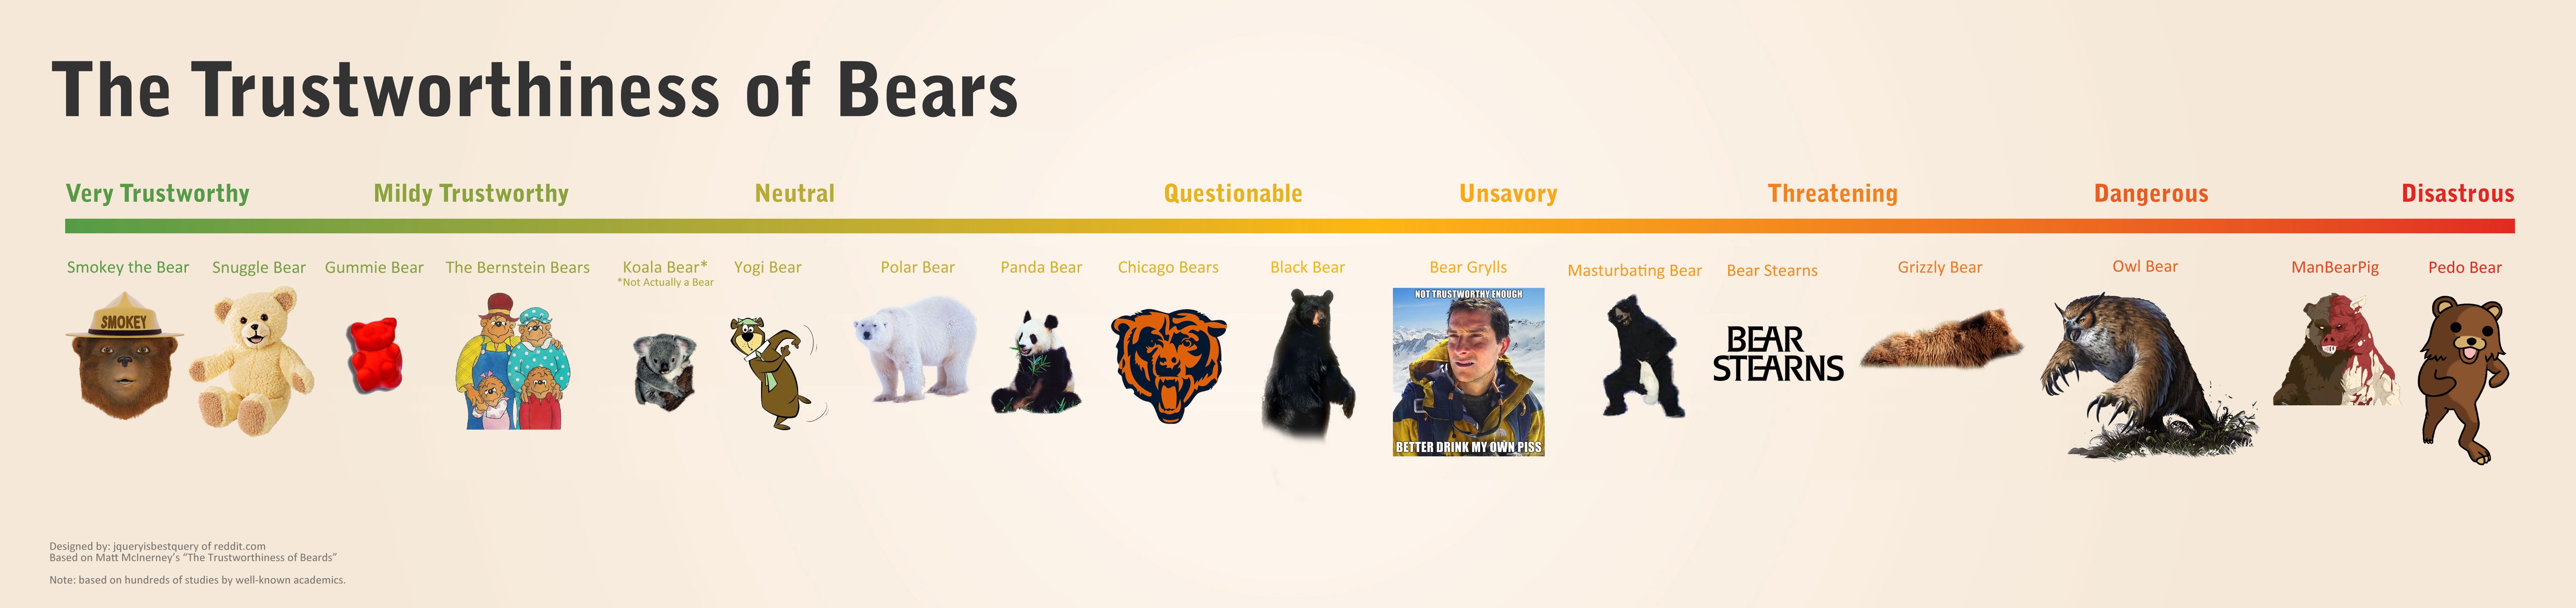 The Trustworthiness of Bears